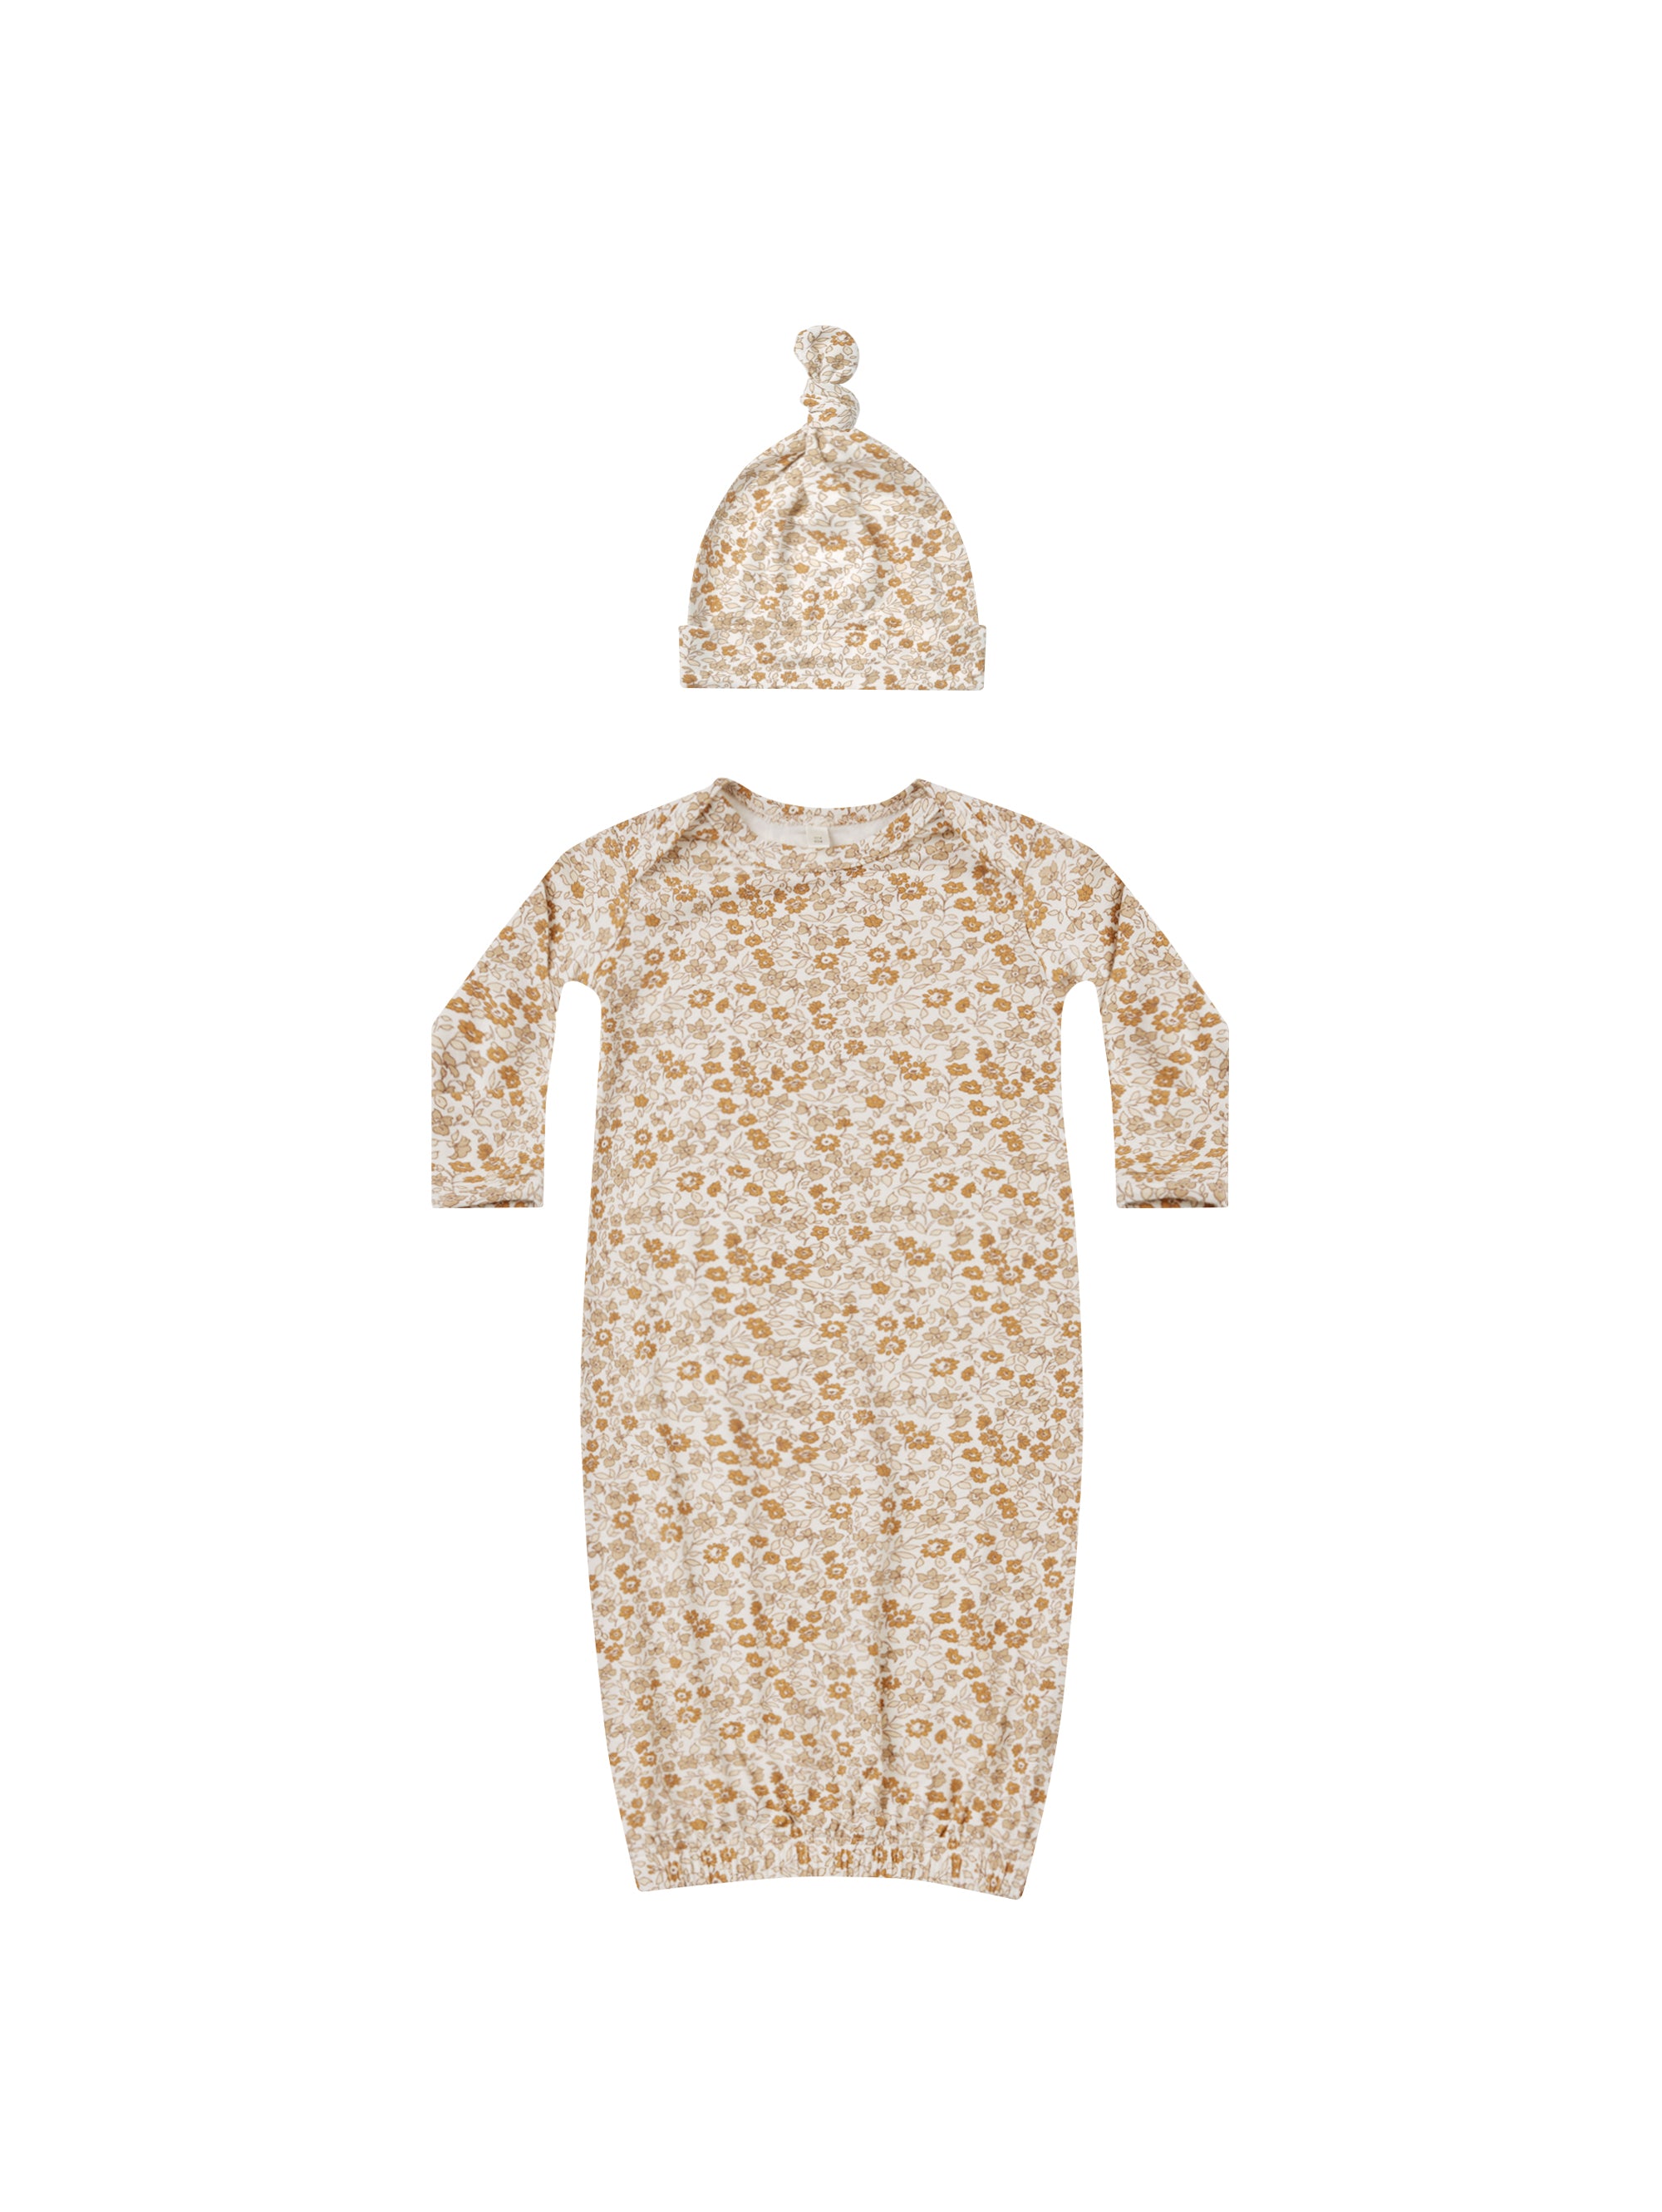 Knotted Baby Gown + Hat Set